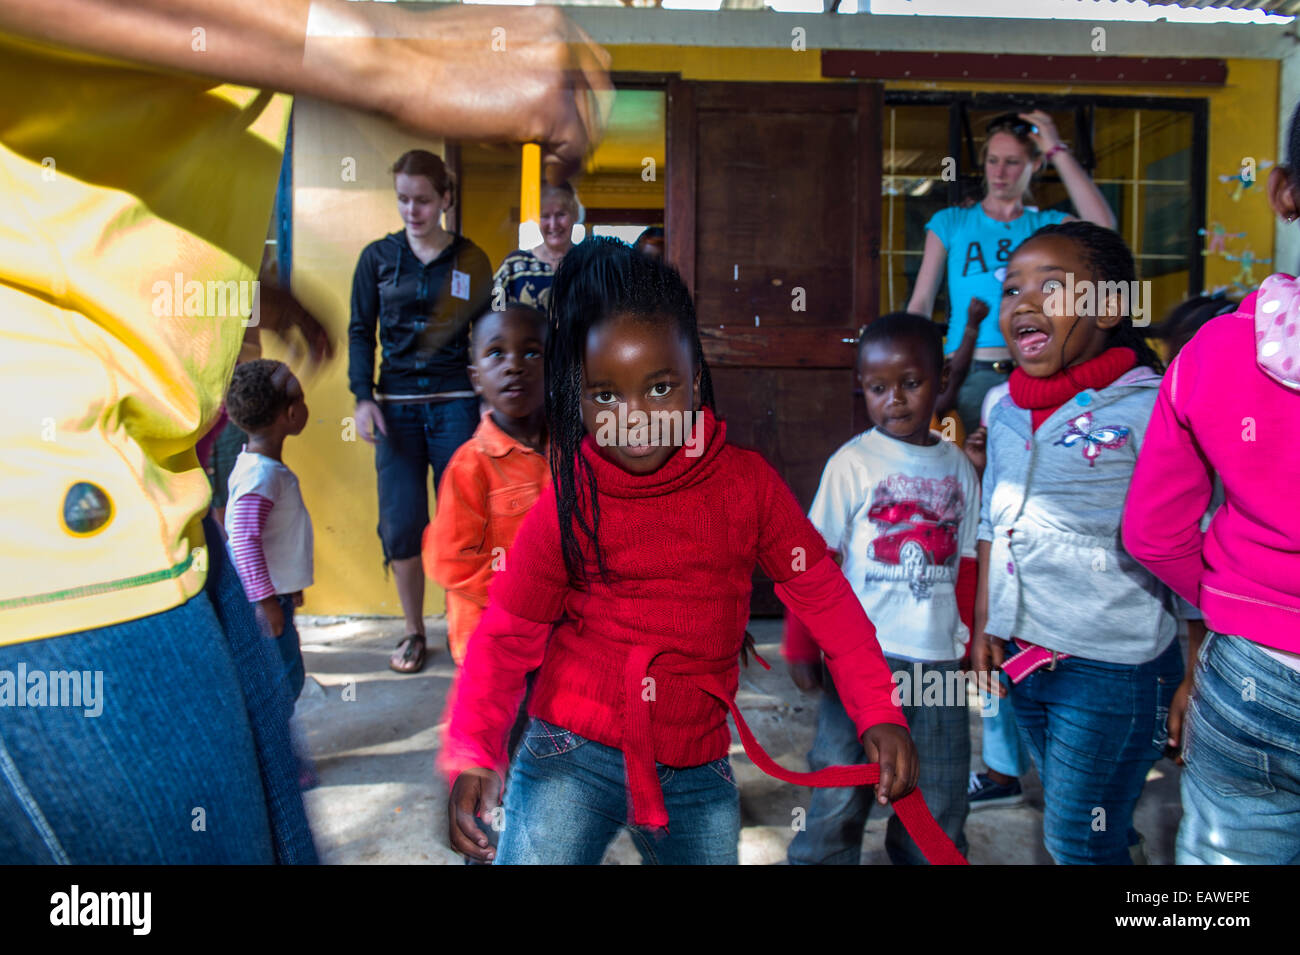 Girls dance to African music during a break from classes at school. Stock Photo